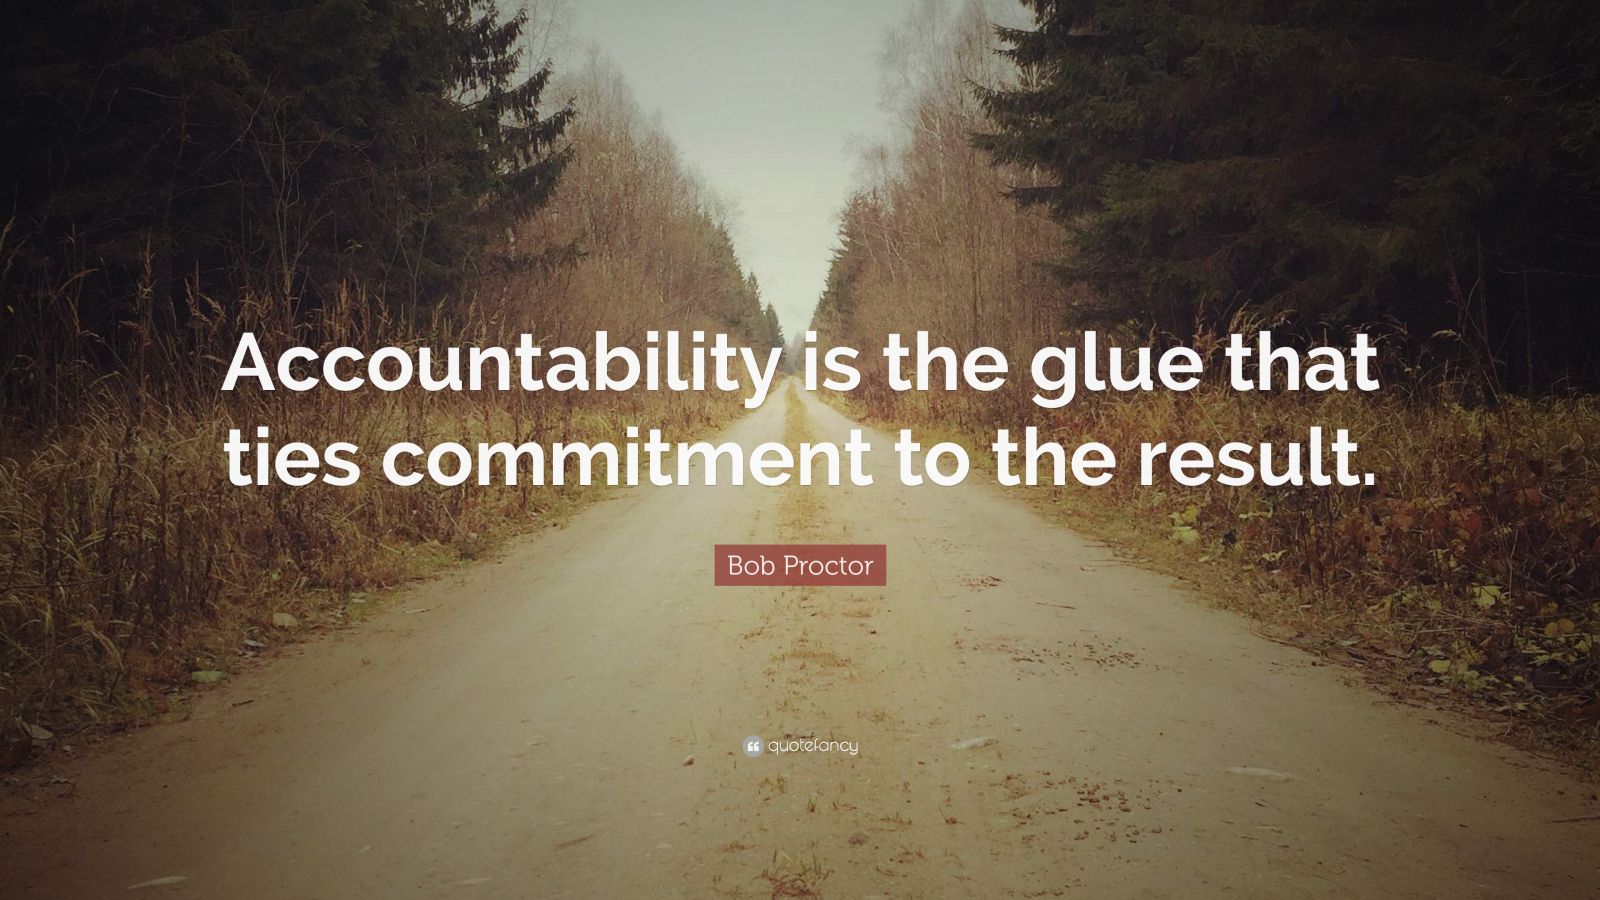 Bob Proctor Quote: “Accountability is the glue that ties commitment to